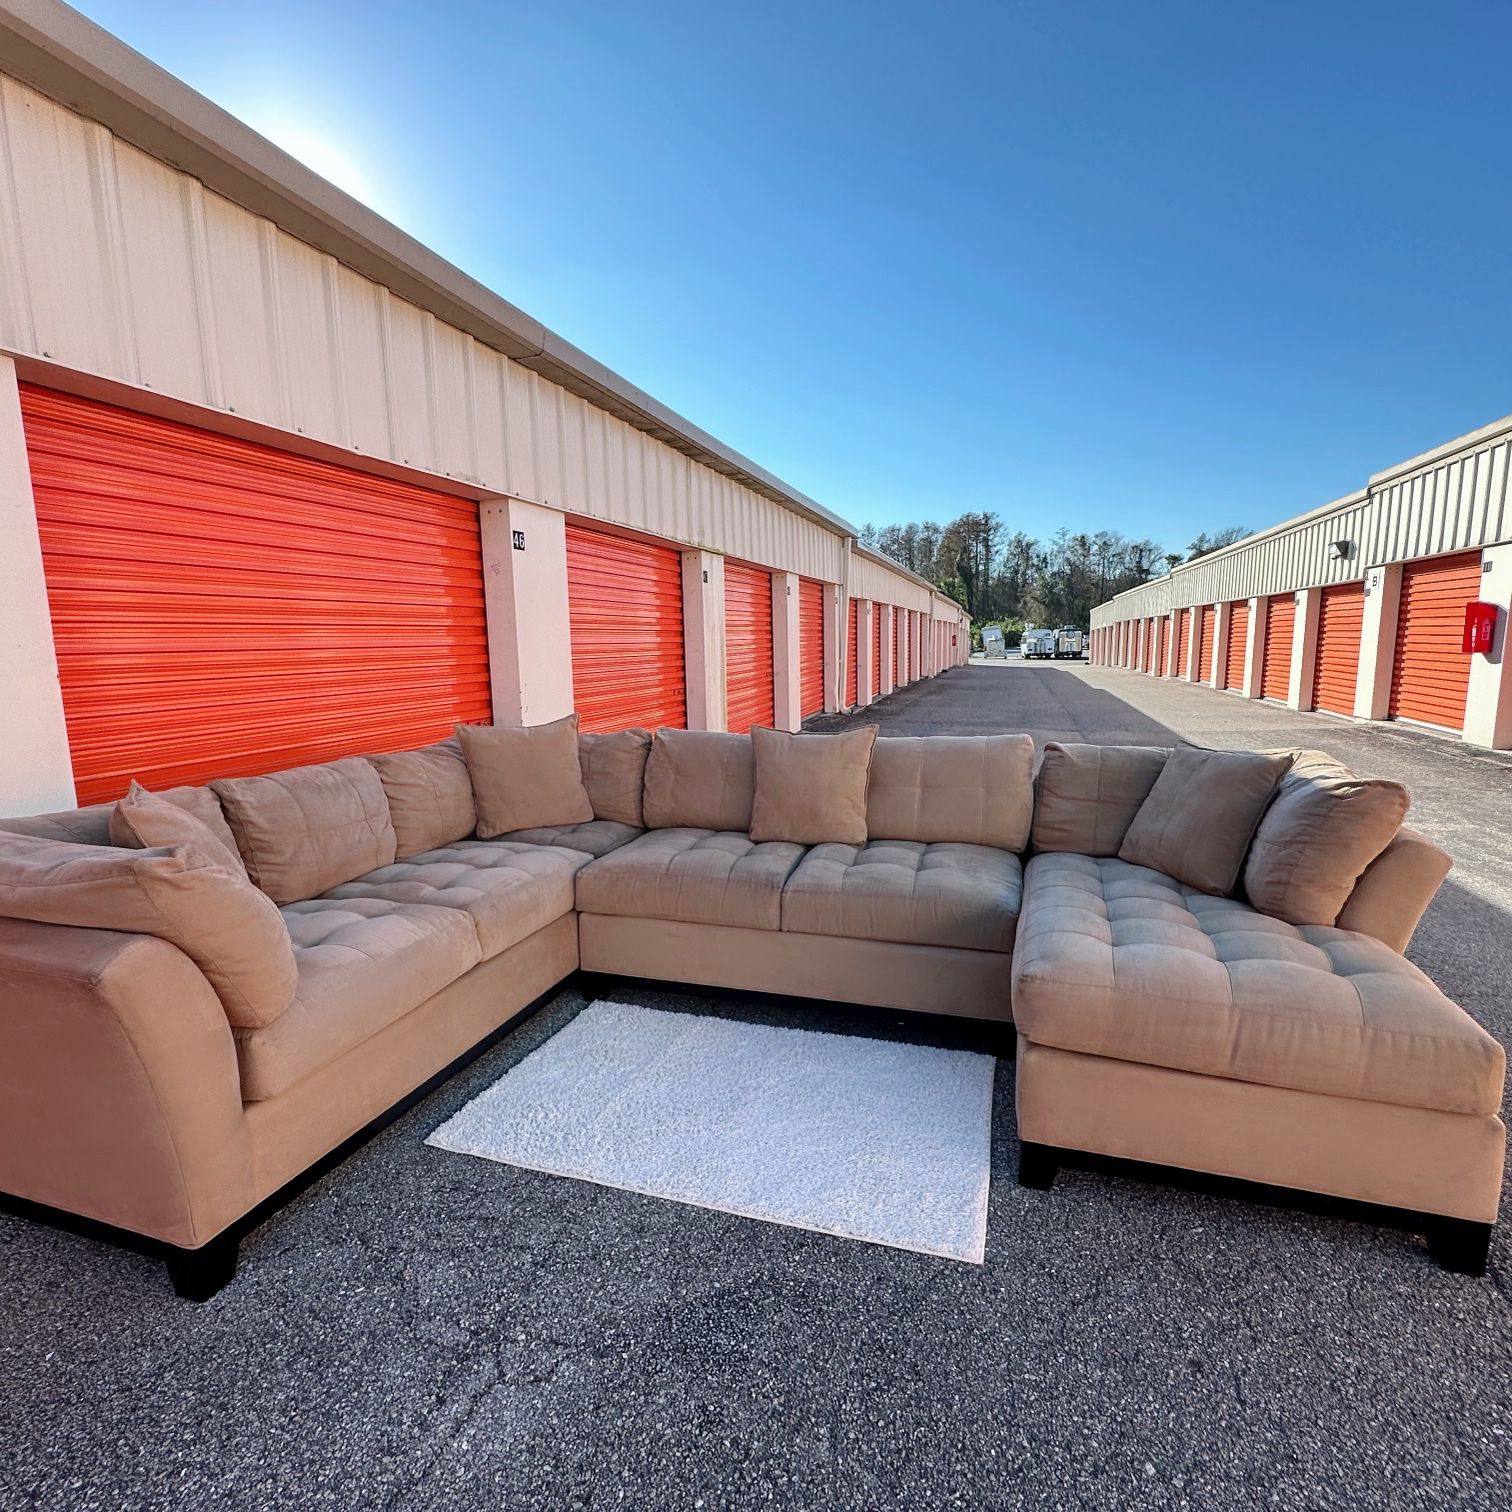 Rooms To Go Sectional Couch Sofa Delivery Available for Sale in